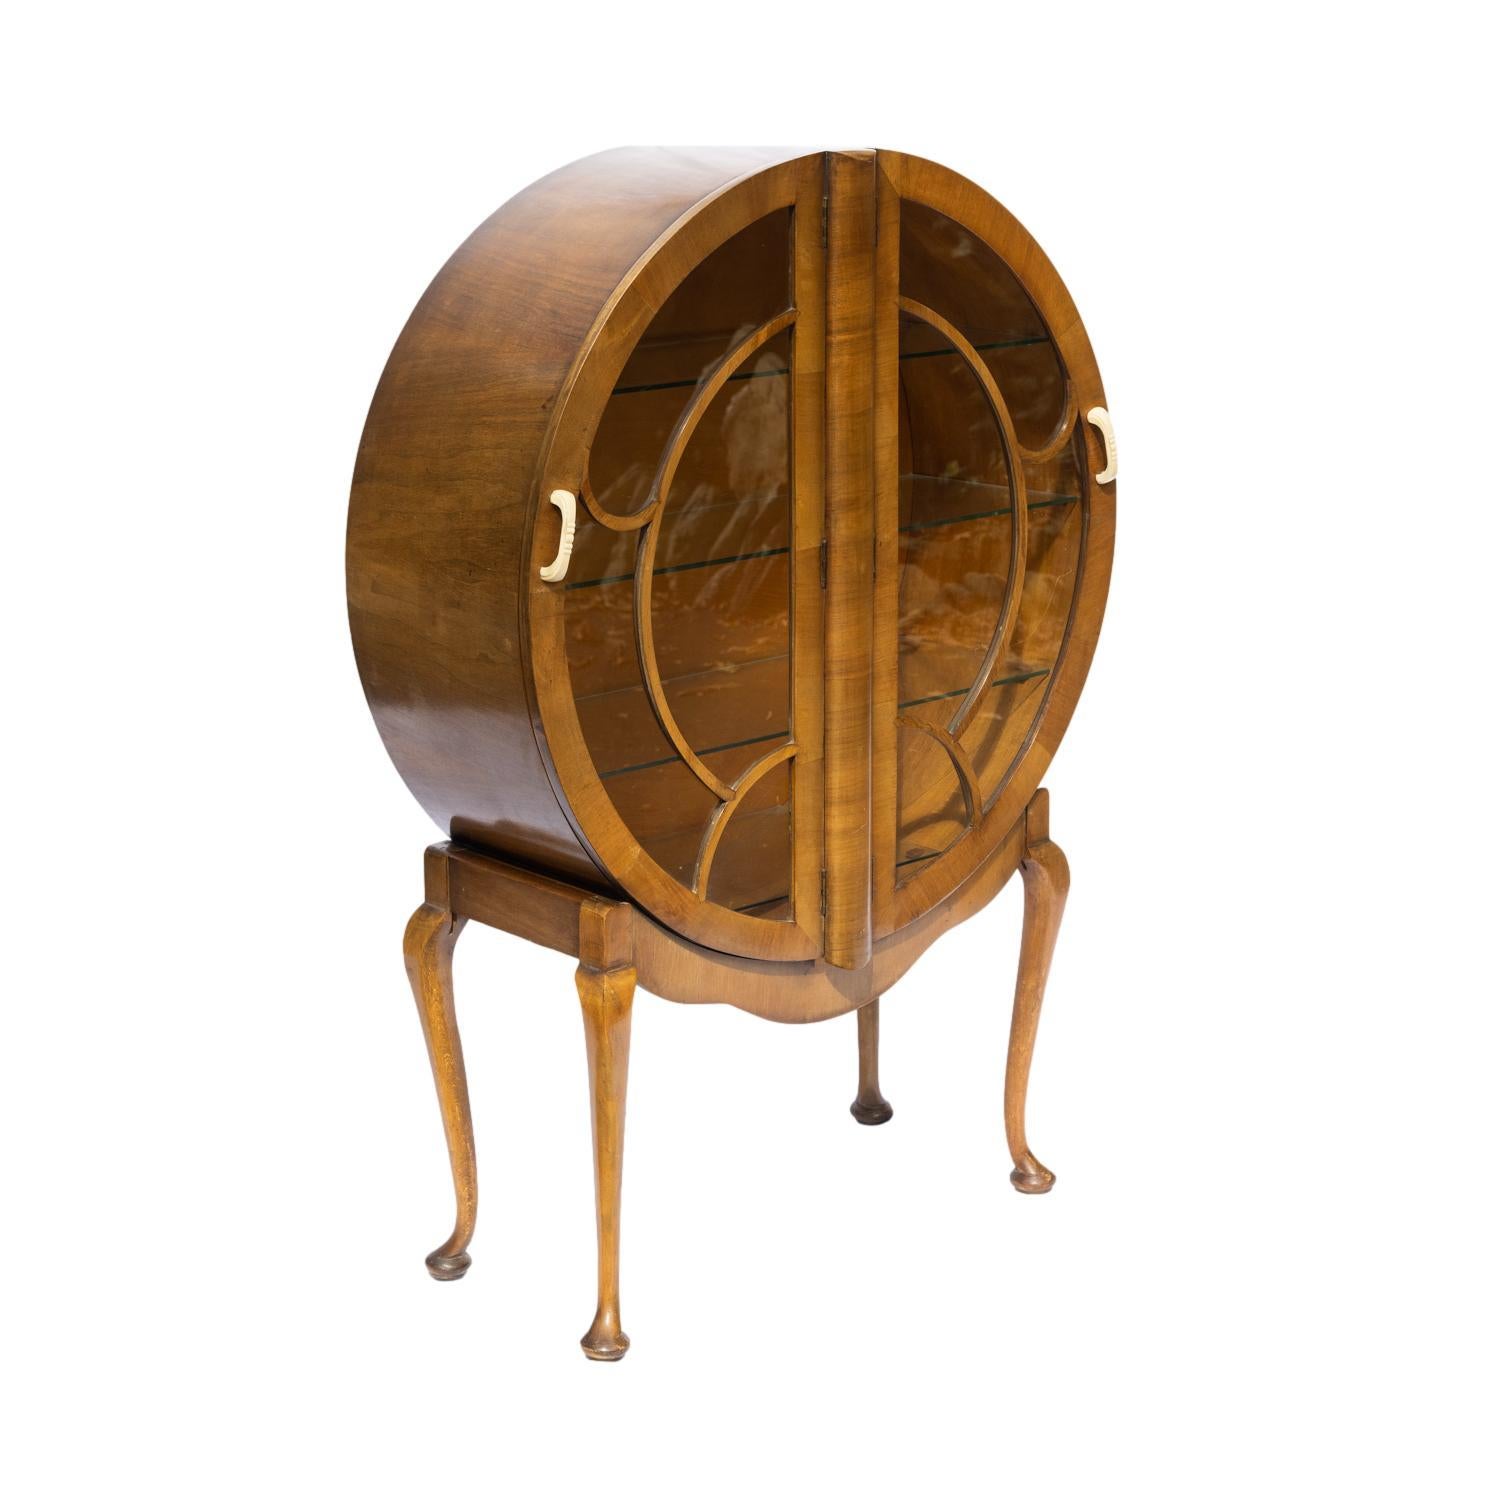 Art Deco Round Display Cabinet in Figured Walnut, with astregal glazed butterfly doors, with Bakalite handles, on Queen Anne cabriole legs, with glass shelves to the interior, the interior glazing bar with maker's badge, 'S. Spaglett, LTD, London,'